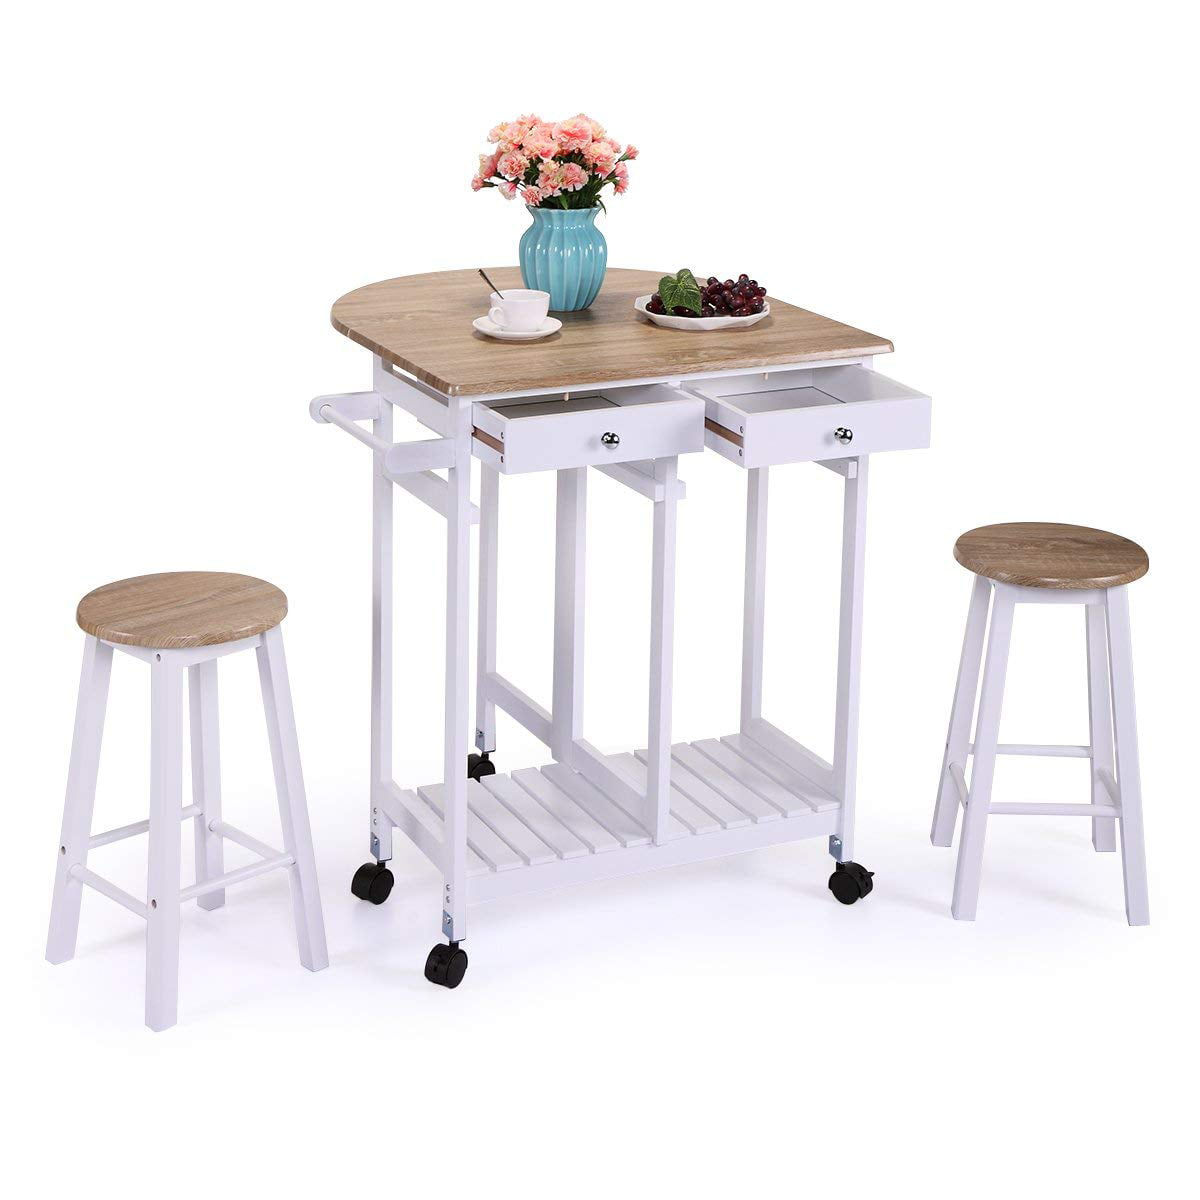 Zimtown Kitchen Cart Island Trolley Storage Dining Table 2 Bar Stools 2 Drawers